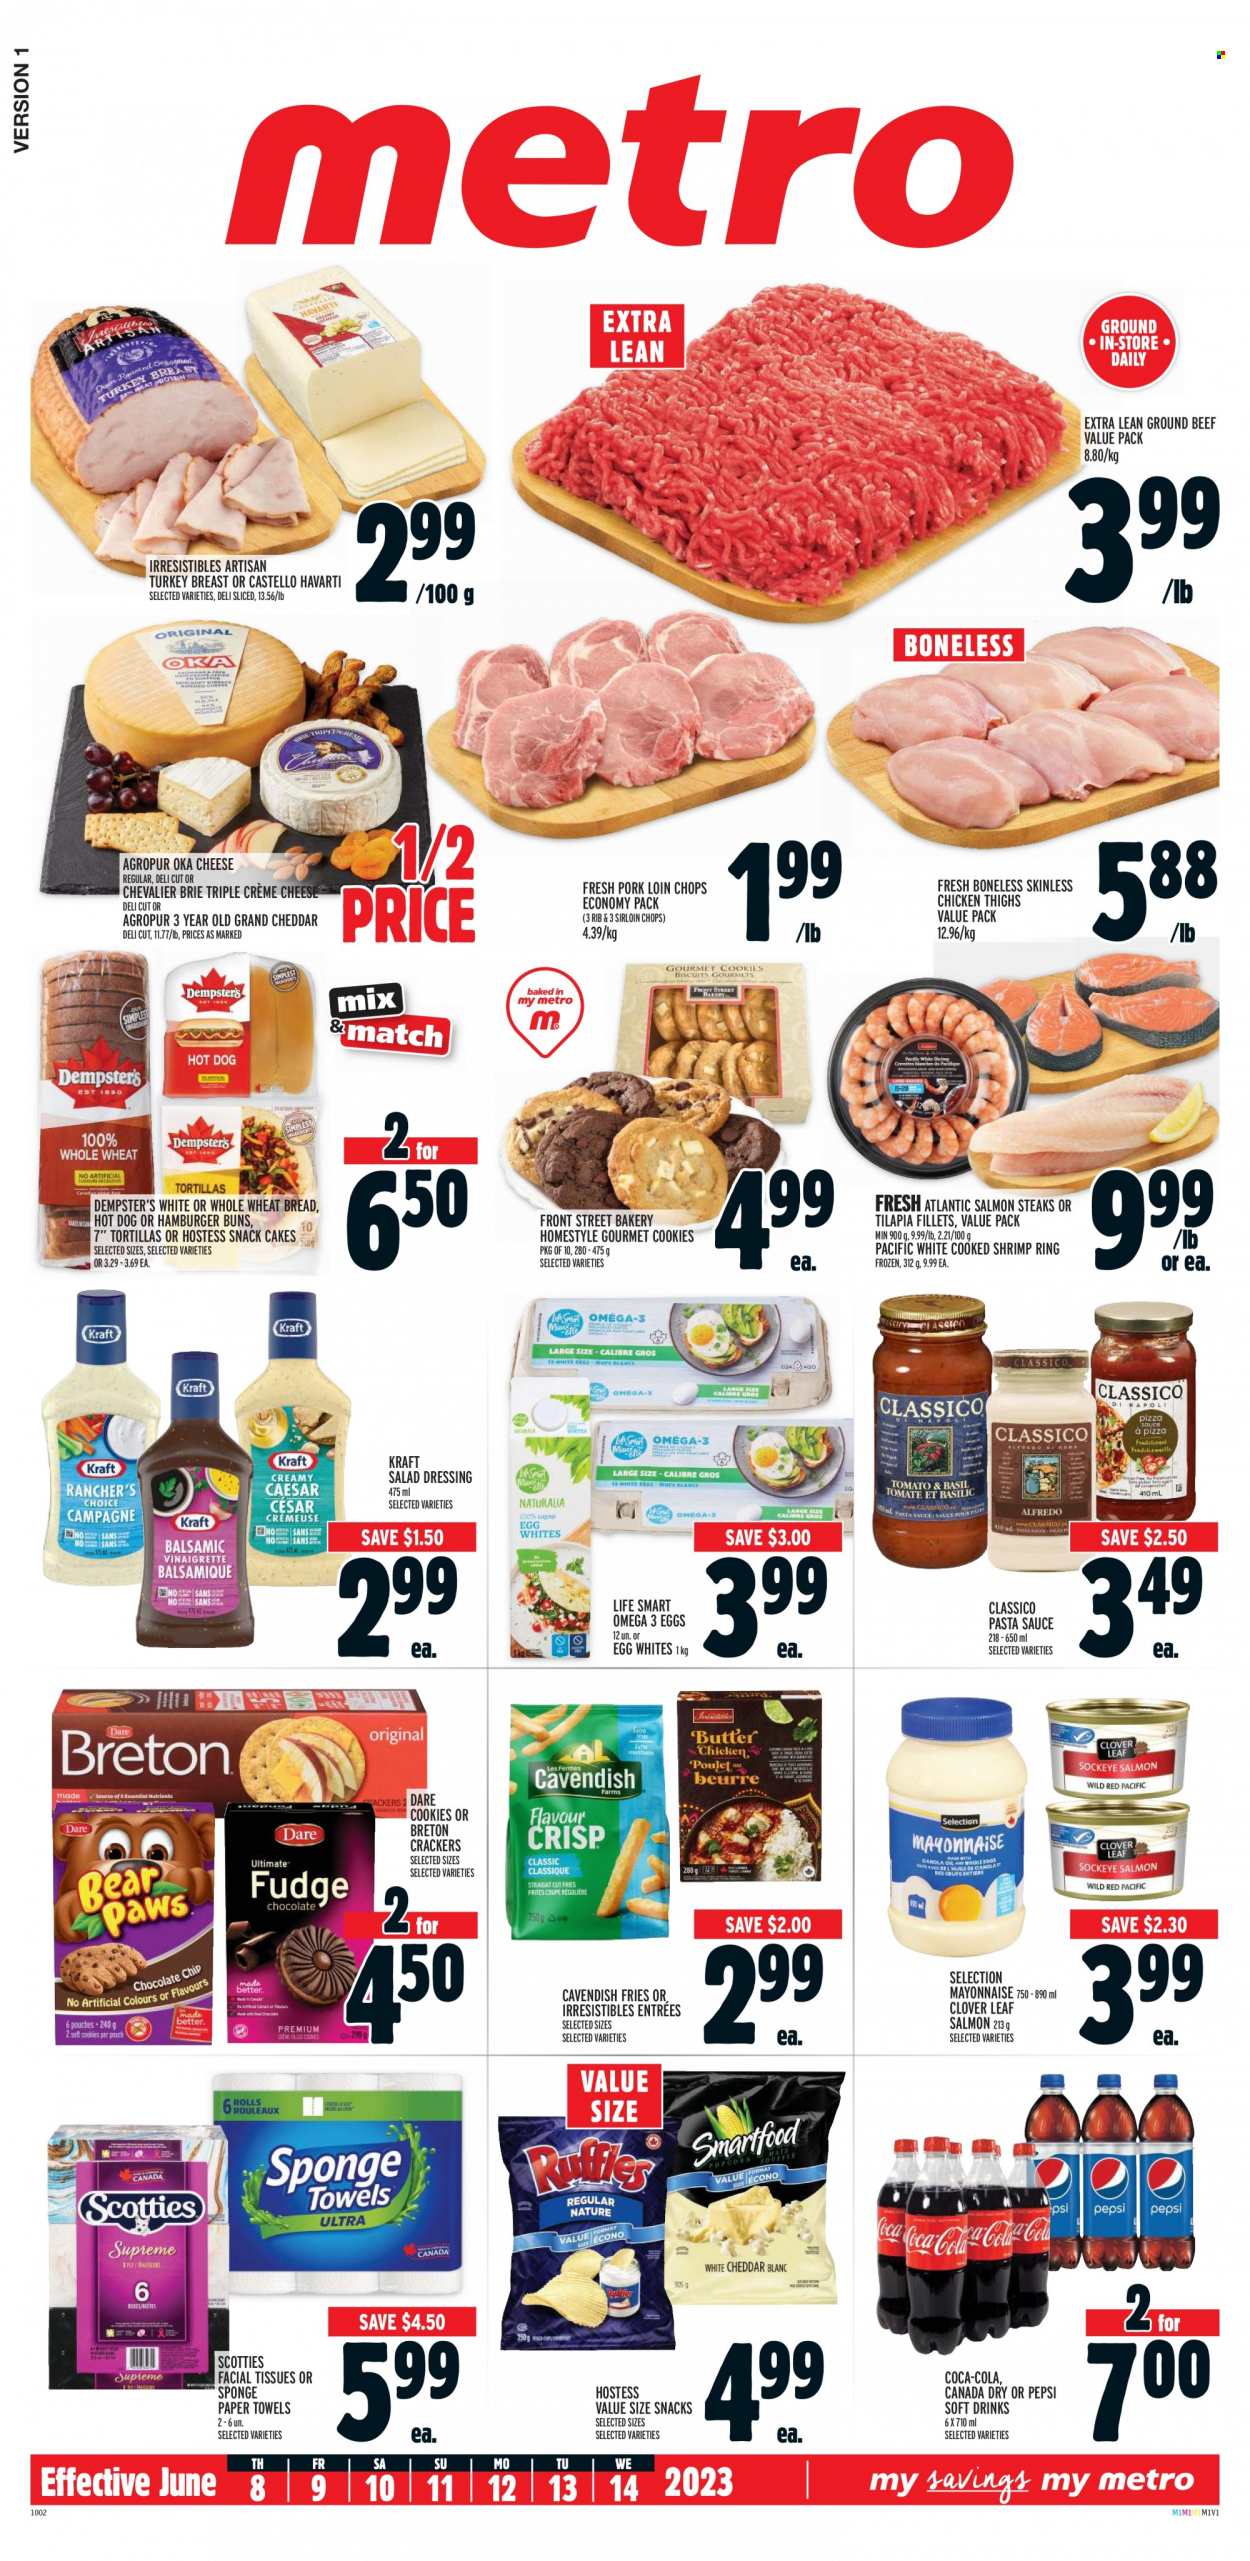 thumbnail - Metro Flyer - June 08, 2023 - June 14, 2023 - Sales products - bread, tortillas, wheat bread, cake, buns, burger buns, salmon, tilapia, shrimps, pasta sauce, sauce, Kraft®, snack, Havarti, cheddar, brie, Clover, mayonnaise, potato fries, cookies, crackers, snack cake, salad dressing, dressing, Classico, Canada Dry, Coca-Cola, Pepsi, soft drink, chicken thighs, chicken, turkey, beef meat, ground beef, steak, pork chops, pork loin, pork meat, tissues, kitchen towels, paper towels, facial tissues, sponge, Omega-3. Page 1.